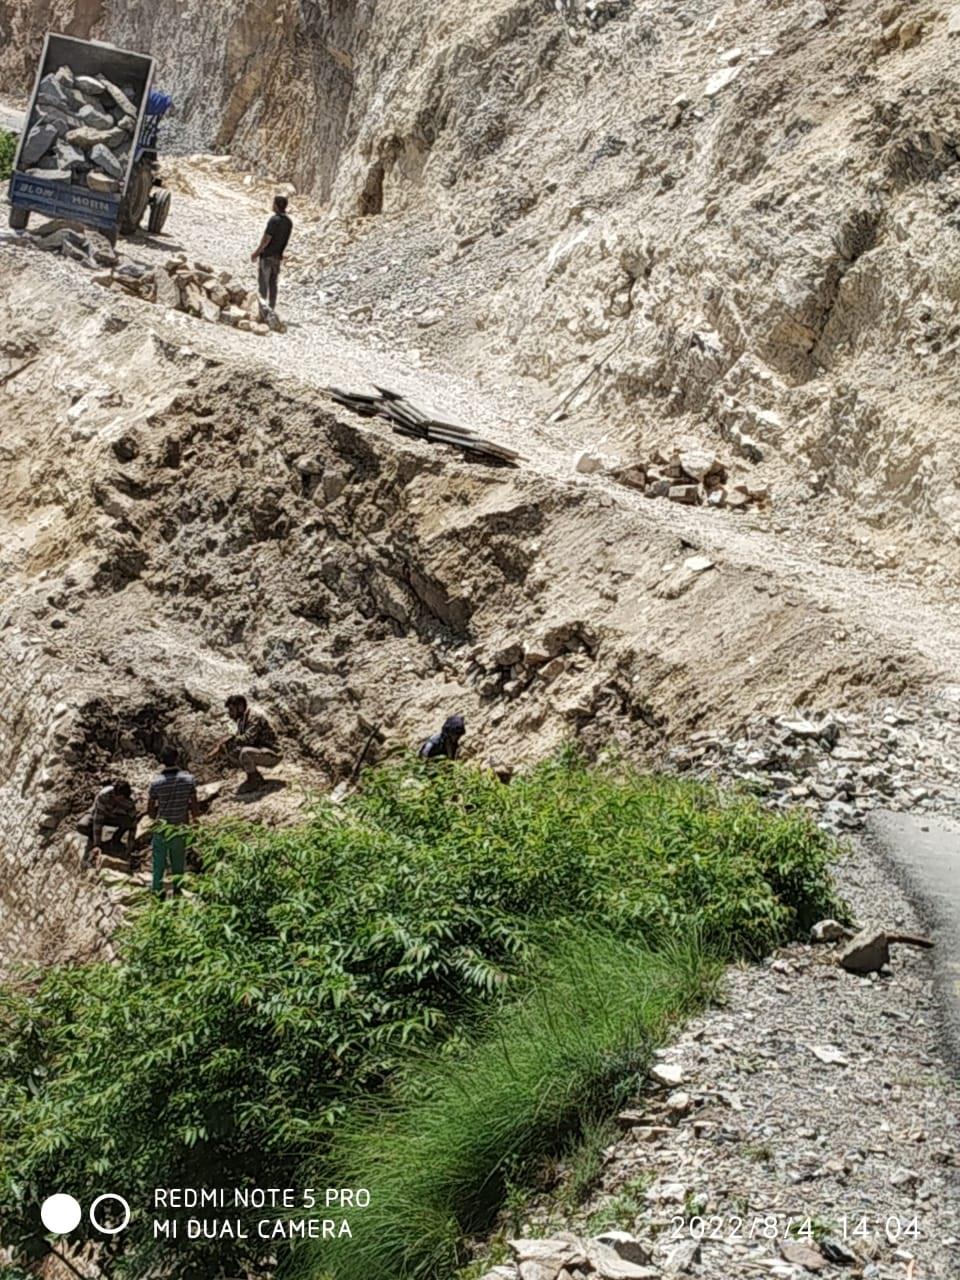 25 panchayats cut off due to landslides on Salooni road in Chamba district